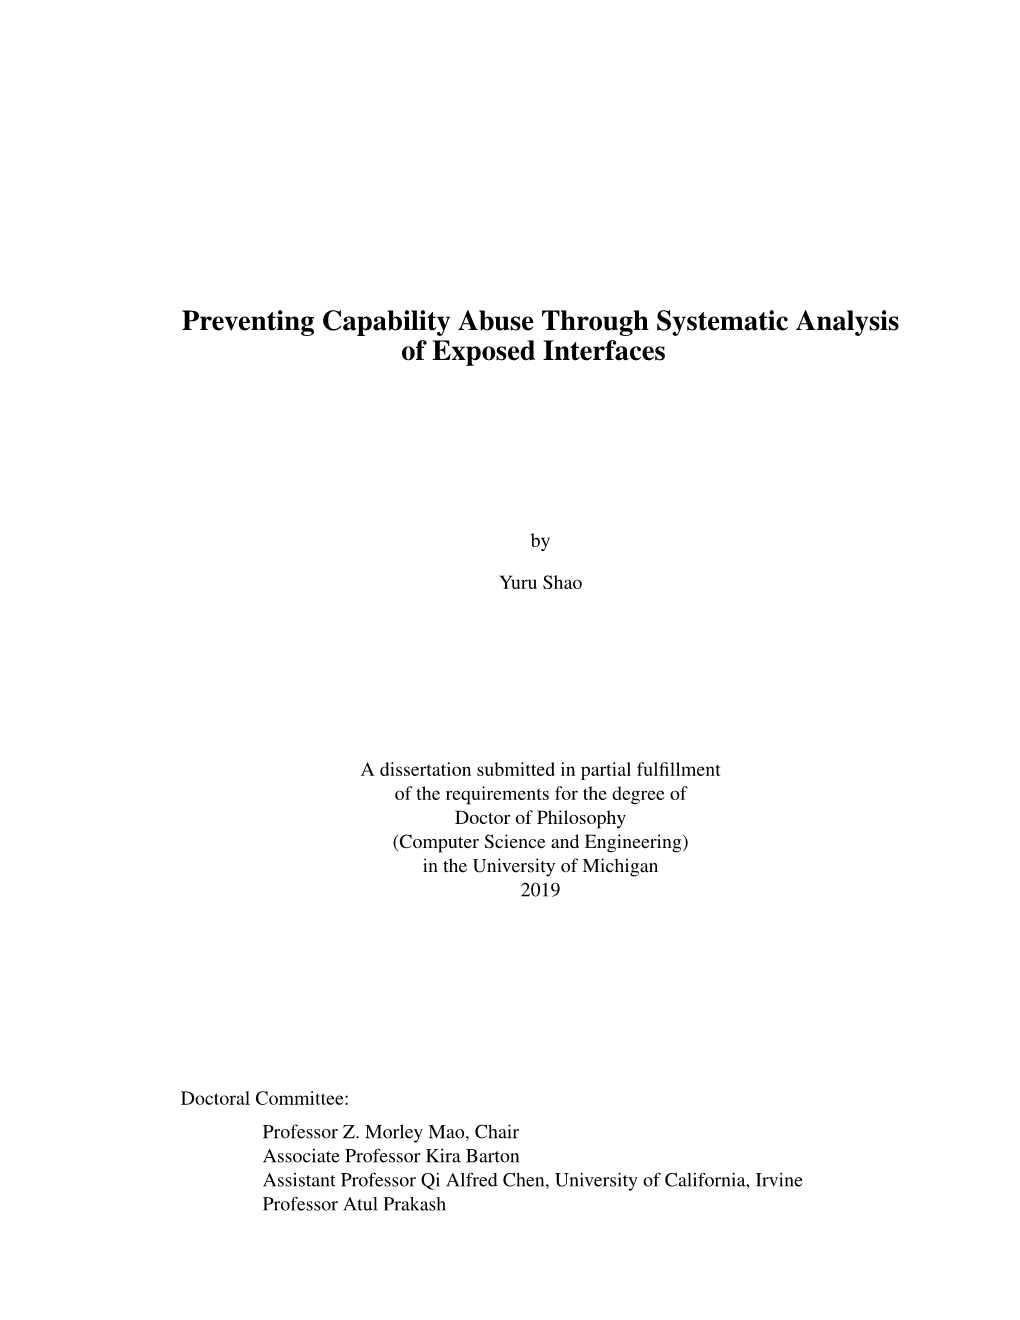 Preventing Capability Abuse Through Systematic Analysis of Exposed Interfaces